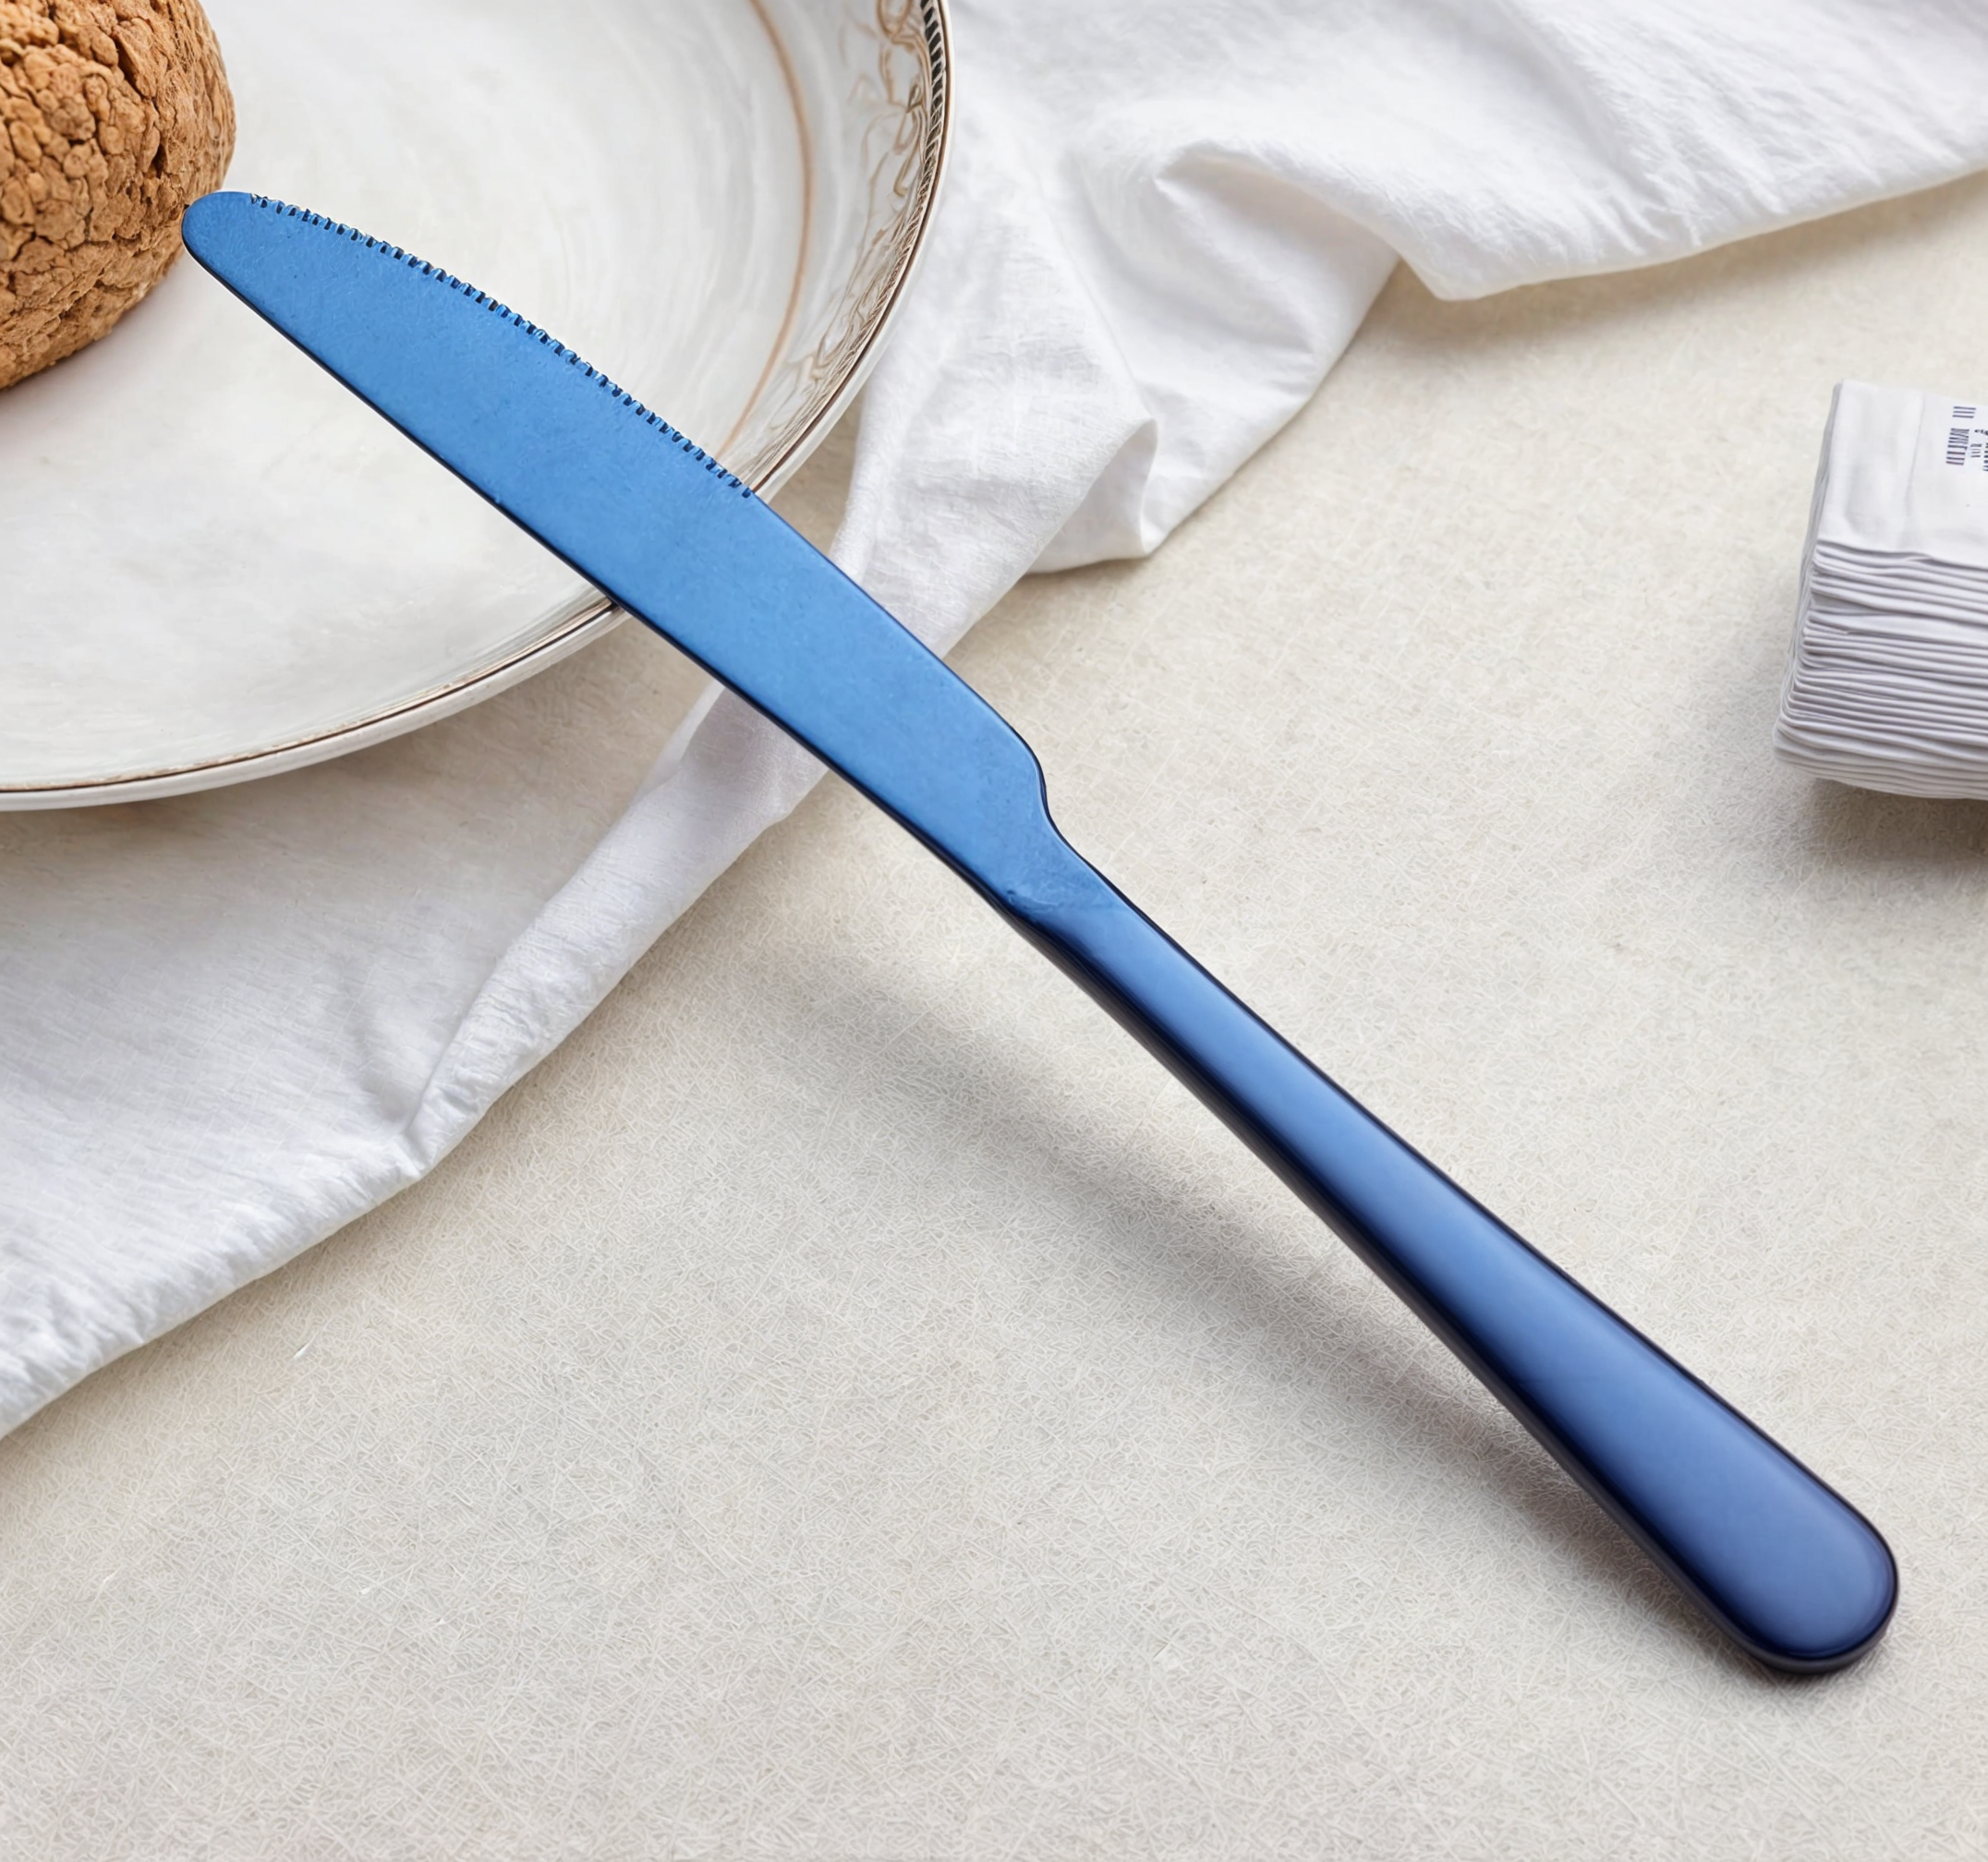 The Blue Cutlery